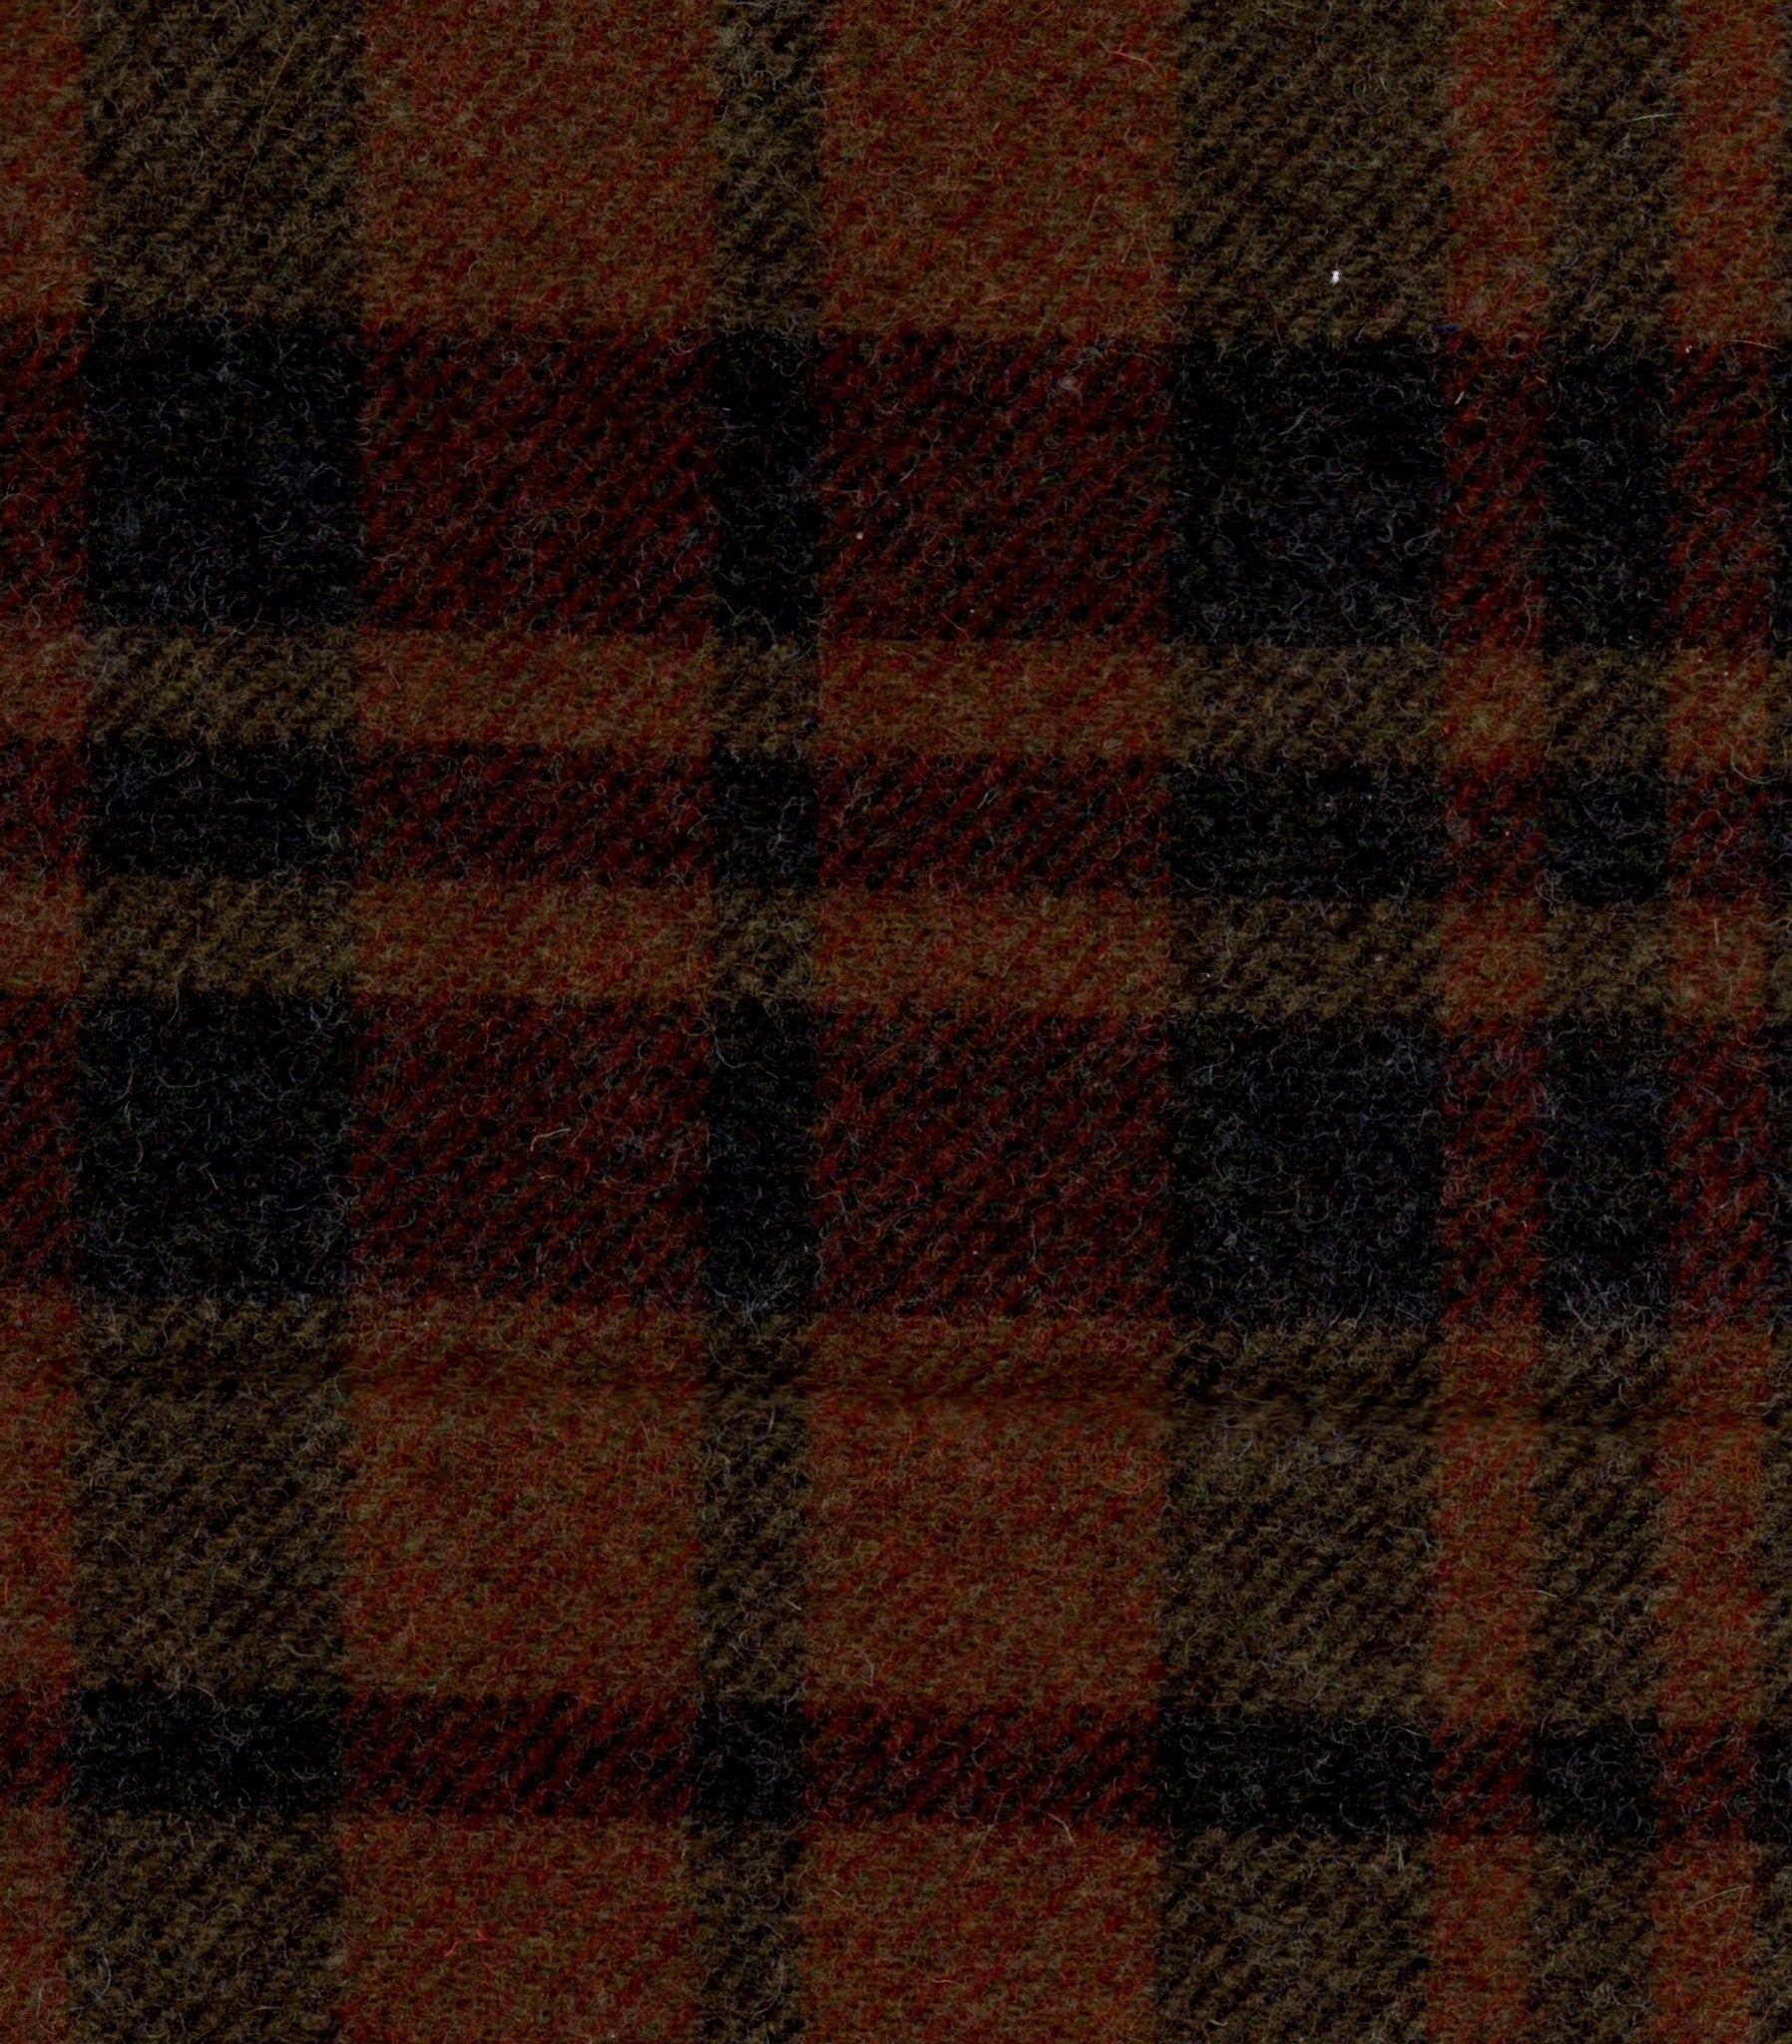 Wool fabric swatch brown and black plaid